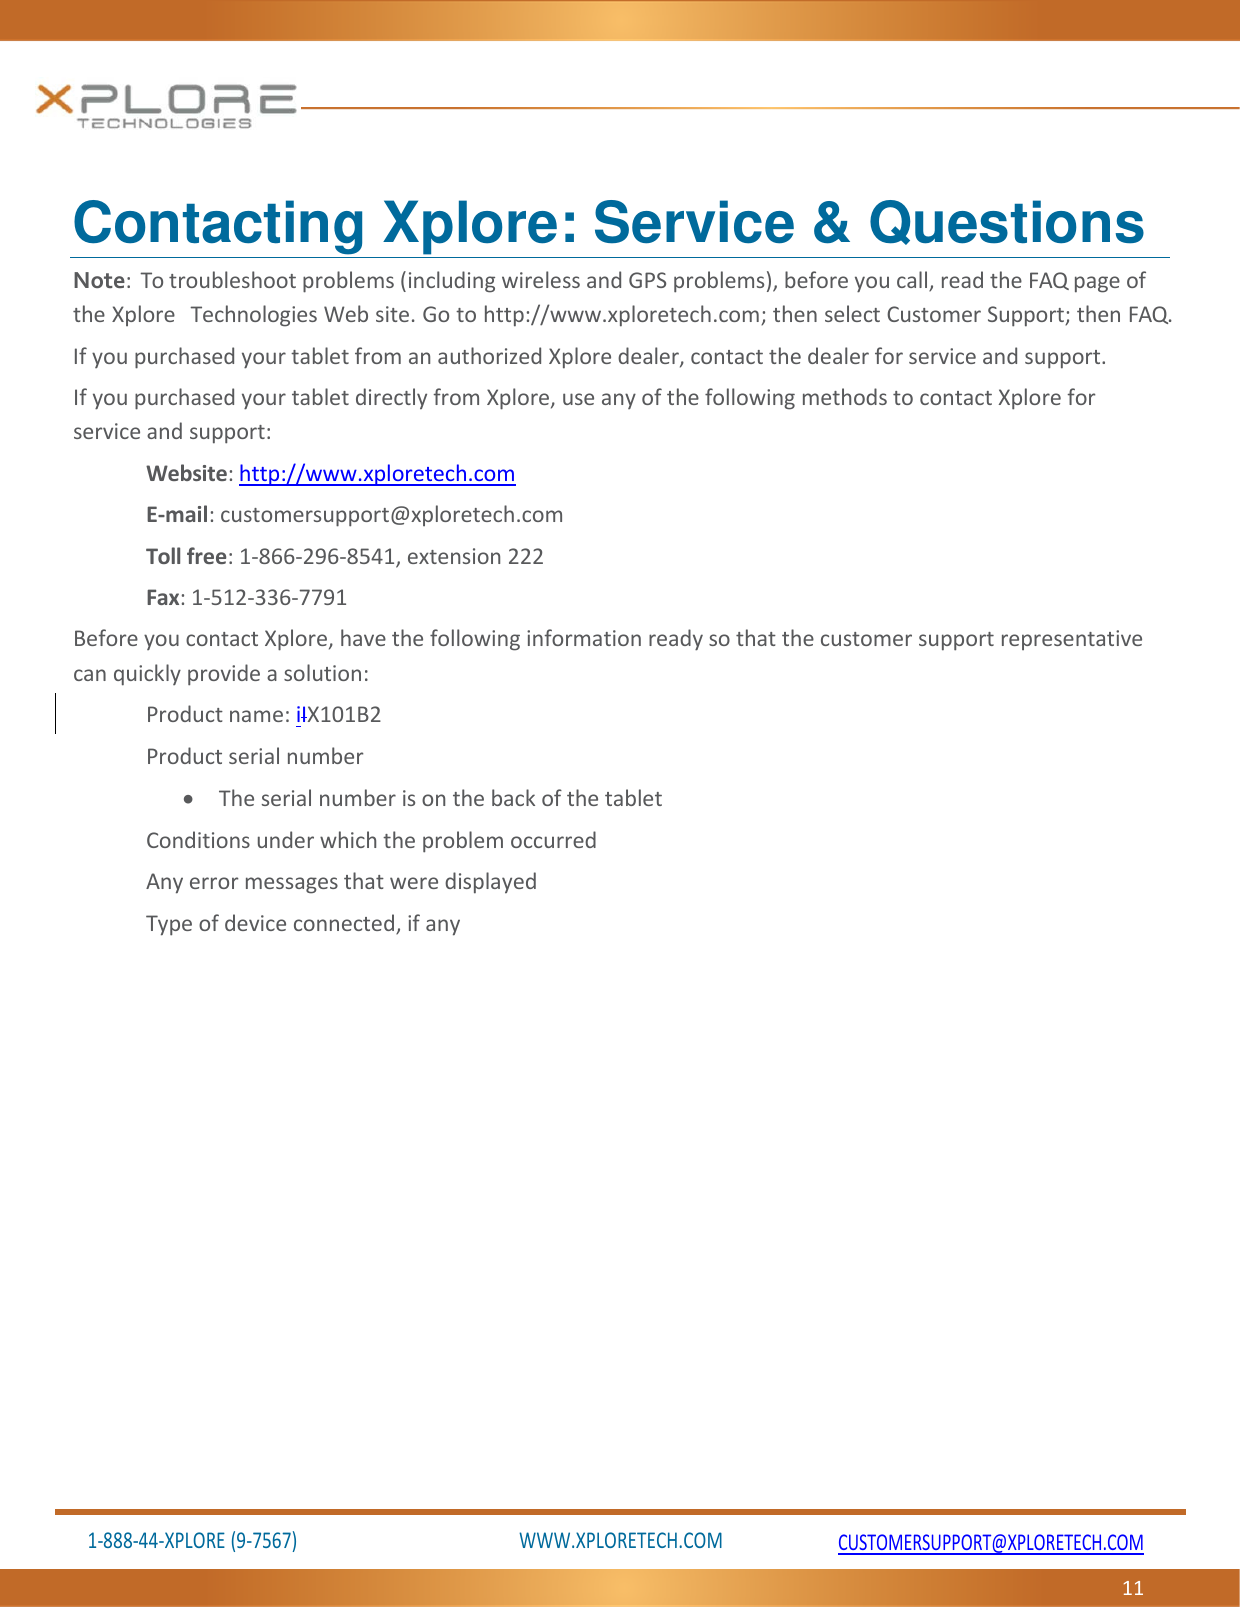 1‐888‐44‐XPLORE(9‐7567)WWW.XPLORETECH.COMCUSTOMERSUPPORT@XPLORETECH.COM11Contacting Xplore: Service &amp; Questions Note:Totroubleshootproblems(includingwirelessandGPSproblems),beforeyoucall,readtheFAQpageoftheXploreTechnologiesWebsite.Gotohttp://www.xploretech.com;thenselectCustomerSupport;thenFAQ.IfyoupurchasedyourtabletfromanauthorizedXploredealer,contactthedealerforserviceandsupport.IfyoupurchasedyourtabletdirectlyfromXplore,useanyofthefollowingmethodstocontactXploreforserviceandsupport:Website:http://www.xploretech.comE‐mail:customersupport@xploretech.comTollfree:1‐866‐296‐8541,extension222Fax:1‐512‐336‐7791BeforeyoucontactXplore,havethefollowinginformationreadysothatthecustomersupportrepresentativecanquicklyprovideasolution:Productname:iIX101B2Productserialnumber TheserialnumberisonthebackofthetabletConditionsunderwhichtheproblemoccurredAnyerrormessagesthatweredisplayedTypeofdeviceconnected,ifany